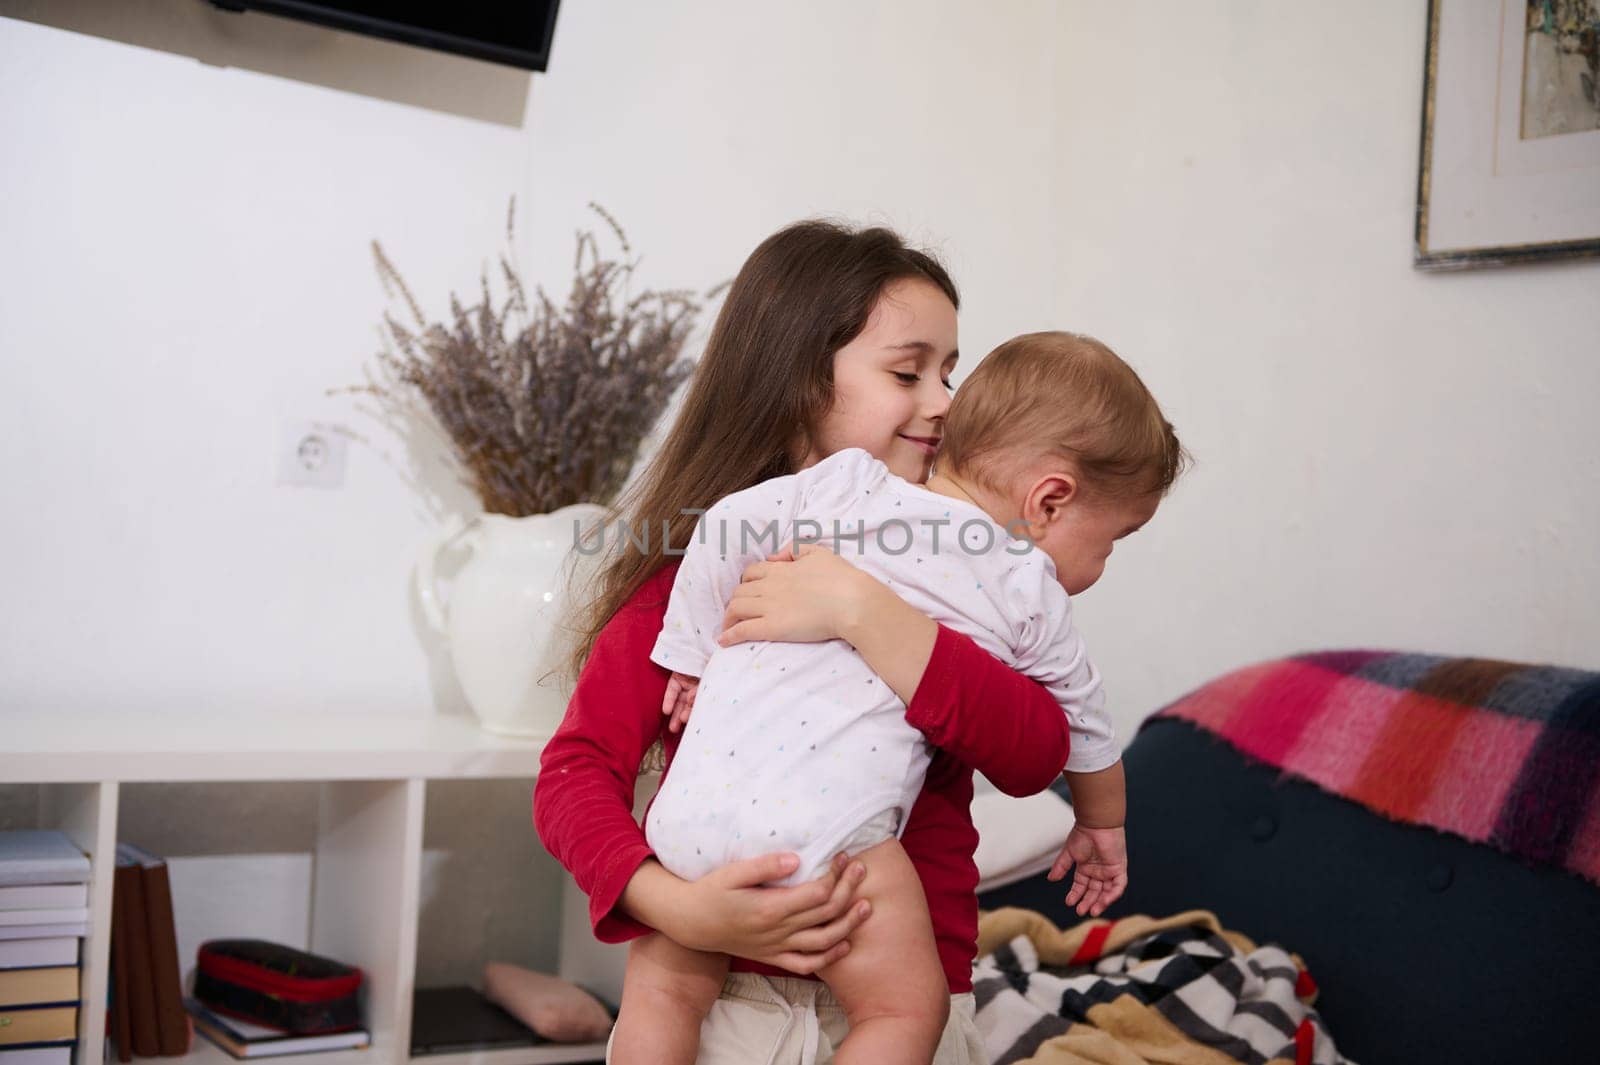 Beautiful kid girl 6 years old, smiles holding hugging her little brother, cute baby boy of 6 months old. Family relationships concept. Love. Care. Tenderness. Affection. International Children's Day by artgf